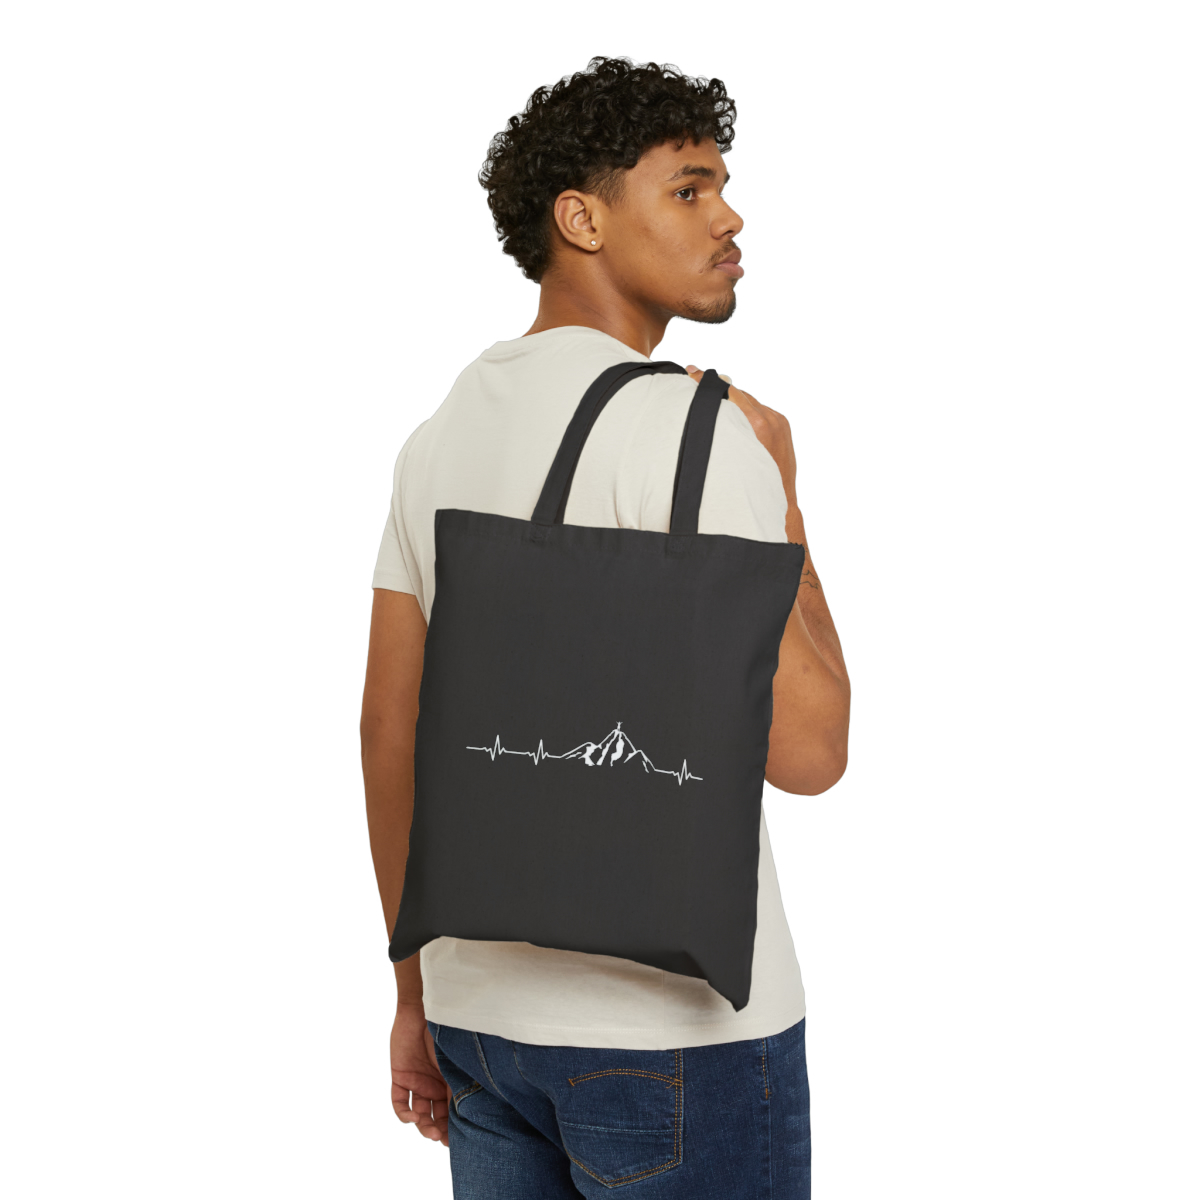 100% Cotton Mountain Heartbeat Graphic Tote Bag, Natural or Black, 15" x 16" - $16.48